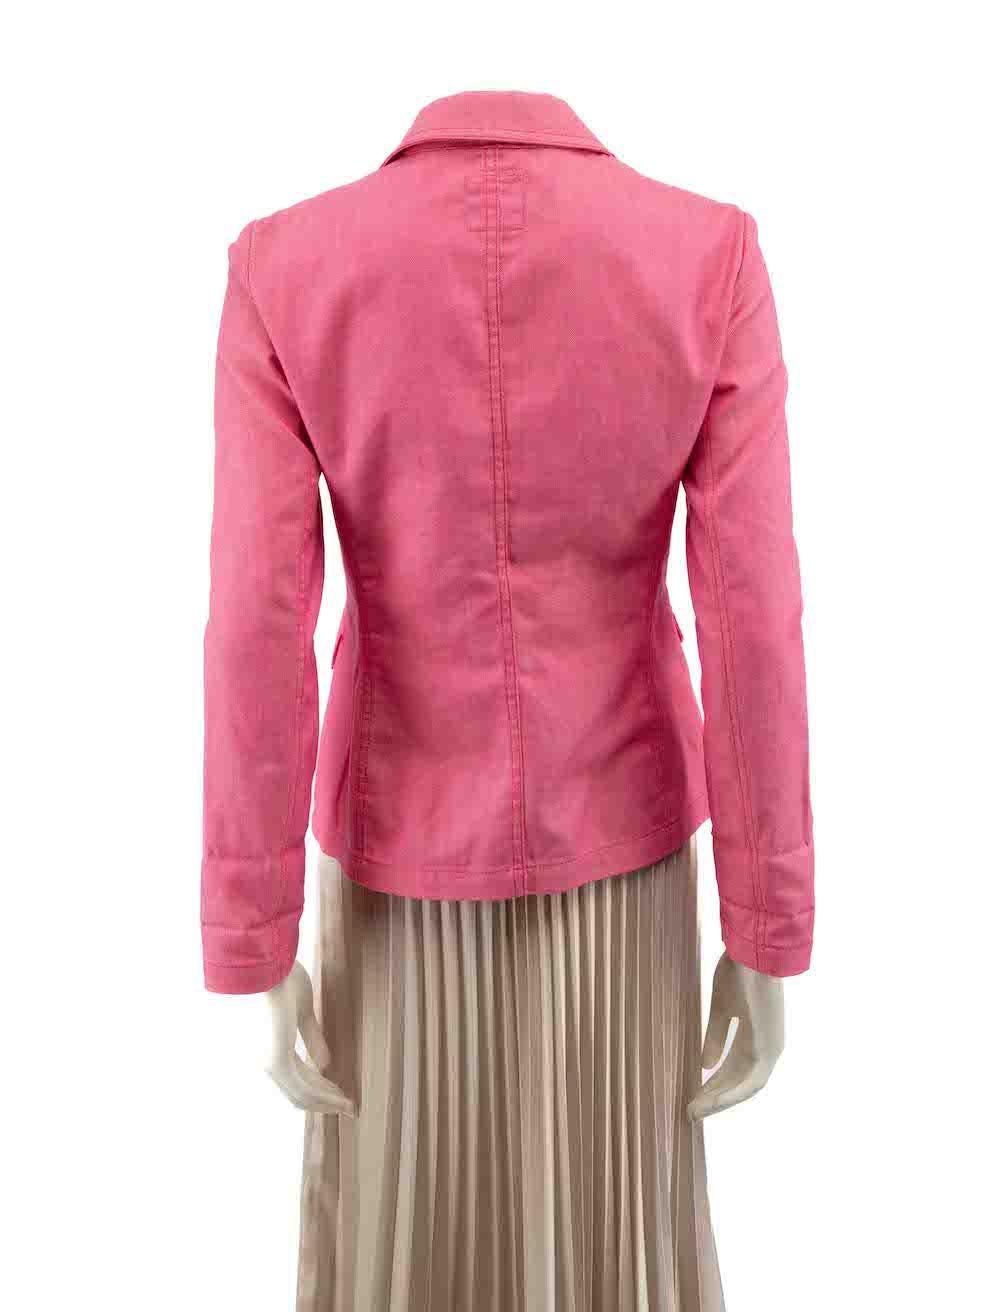 Moschino Pink Single Breasted Jacket Size M In Good Condition For Sale In London, GB